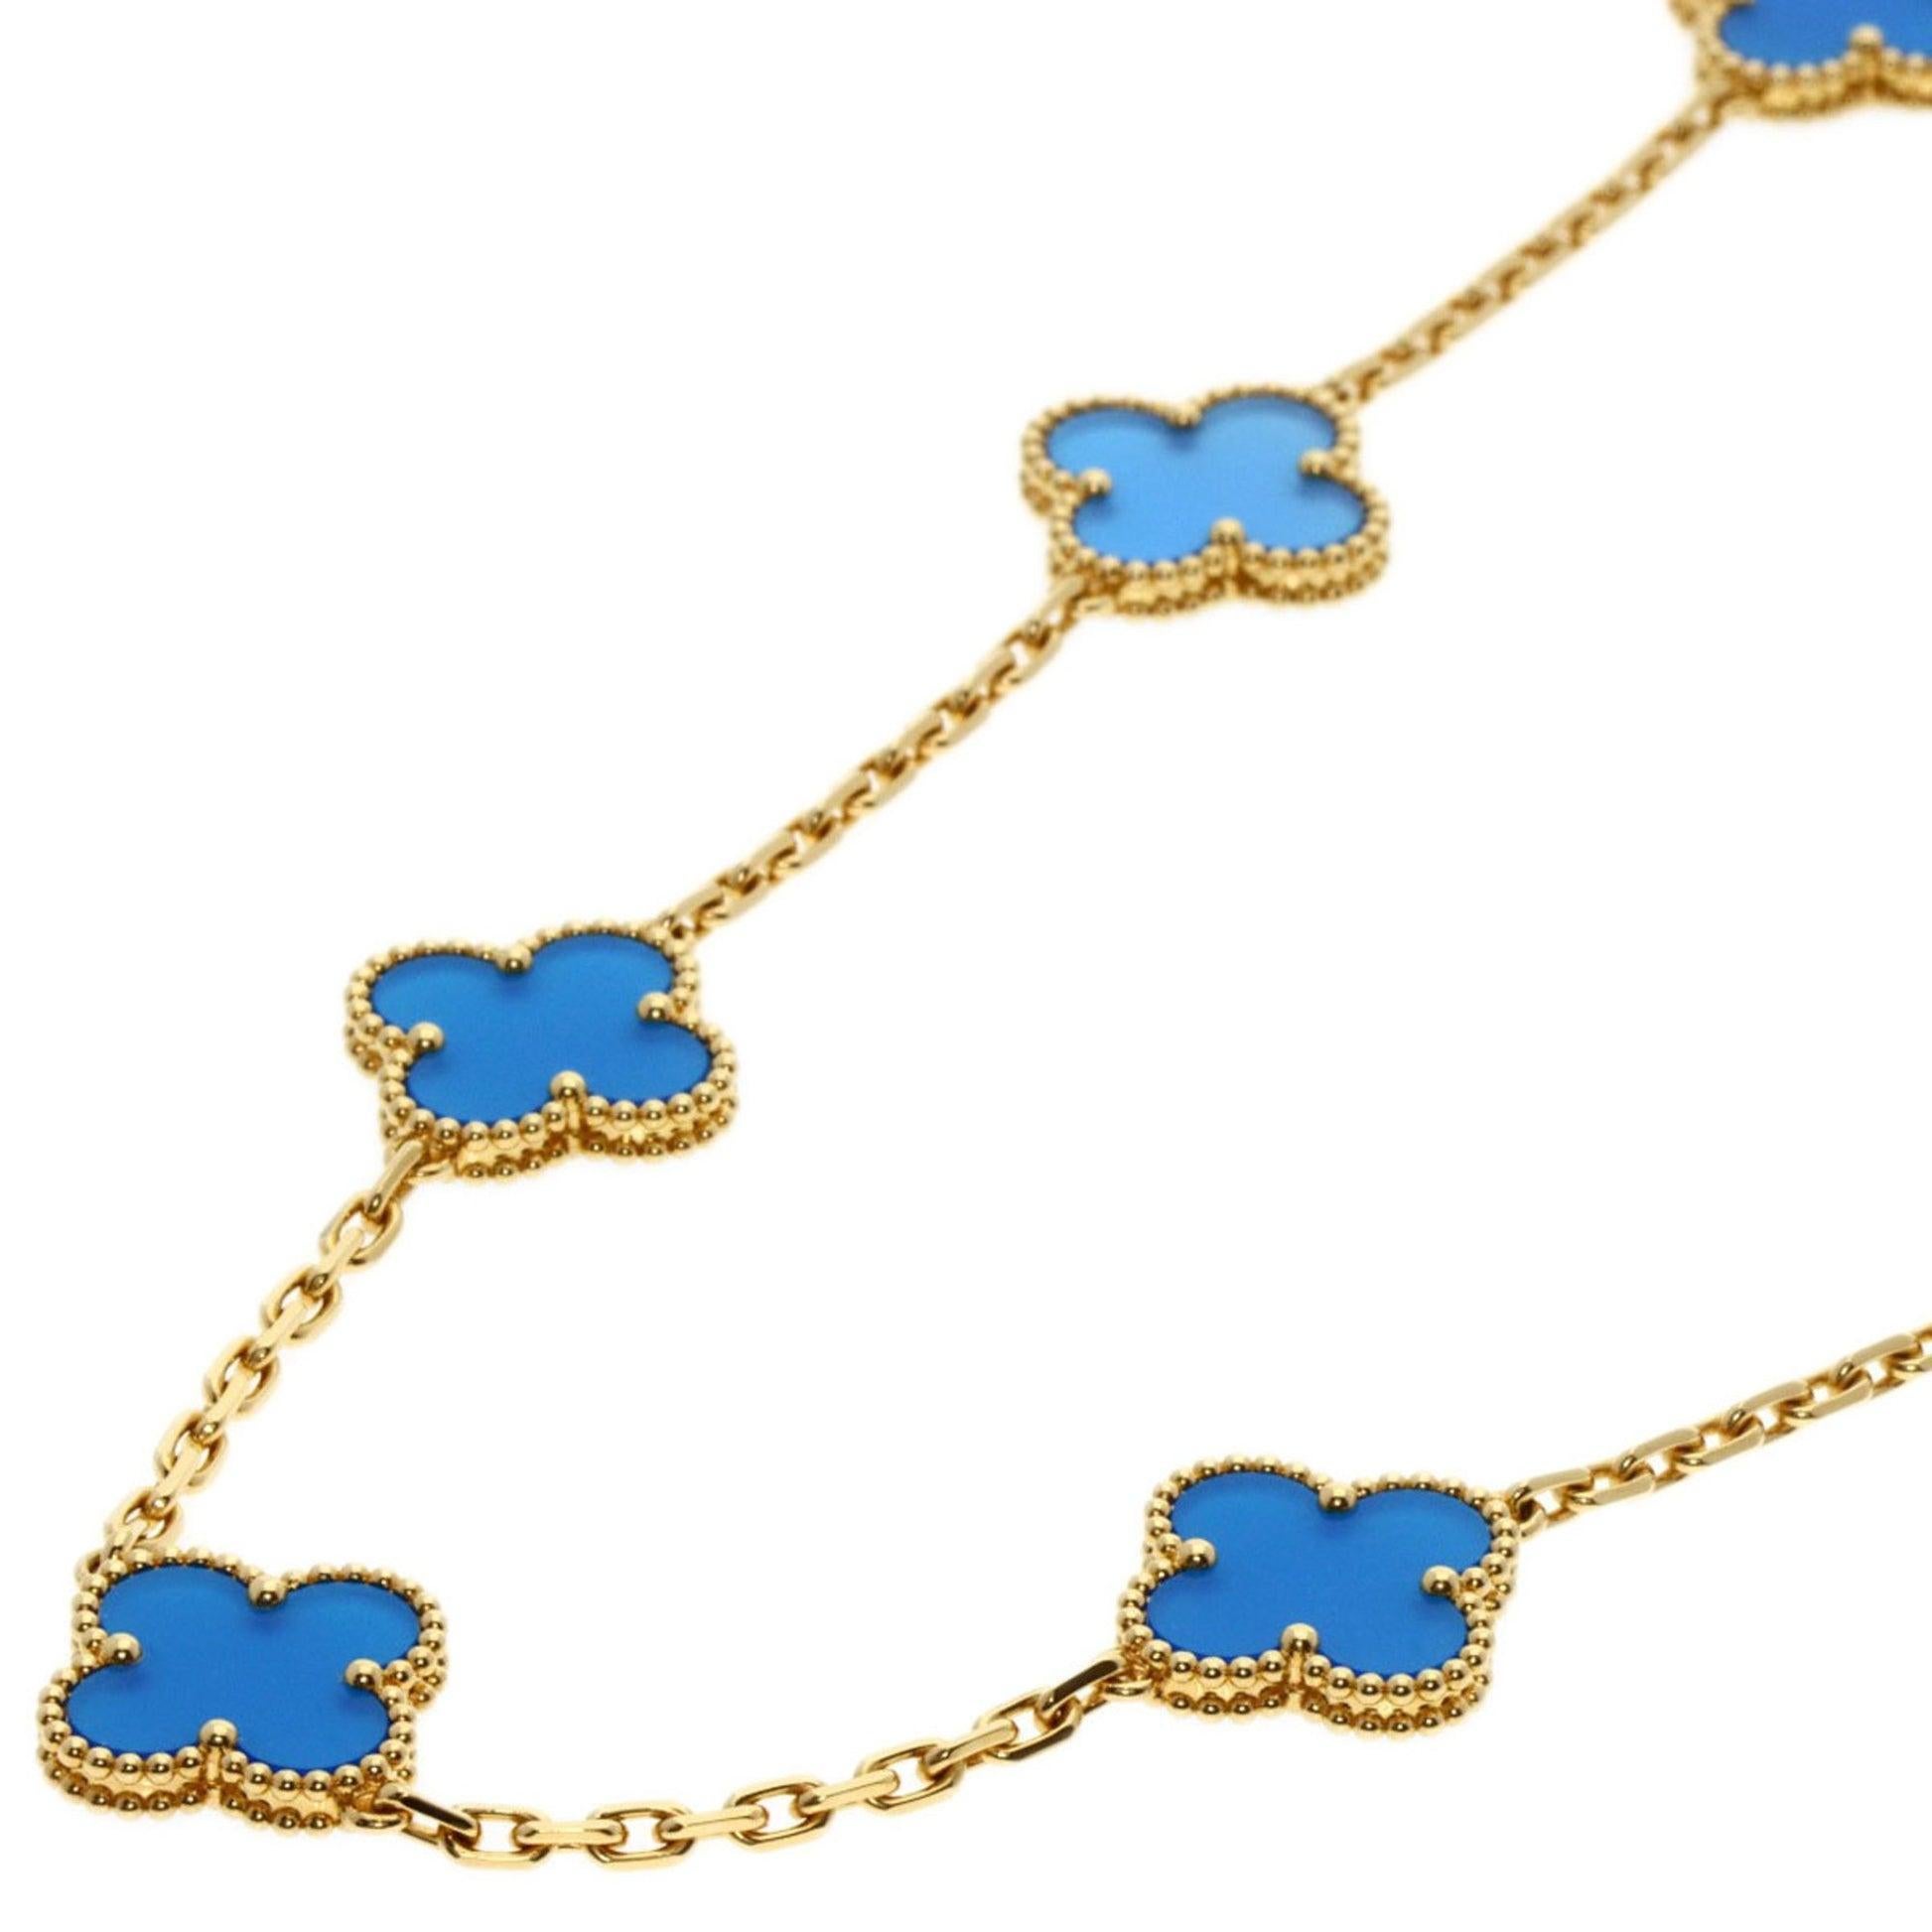 Van Cleef & Arpels Alhambra Blue Agate Necklace in 18K Yellow Gold

Additional Information:
Brand: Van Cleef & Arpels
Gender: Women
Line: Alhambra
Material: Yellow gold (18K)
Condition details: This item has been used and may have some minor flaws.